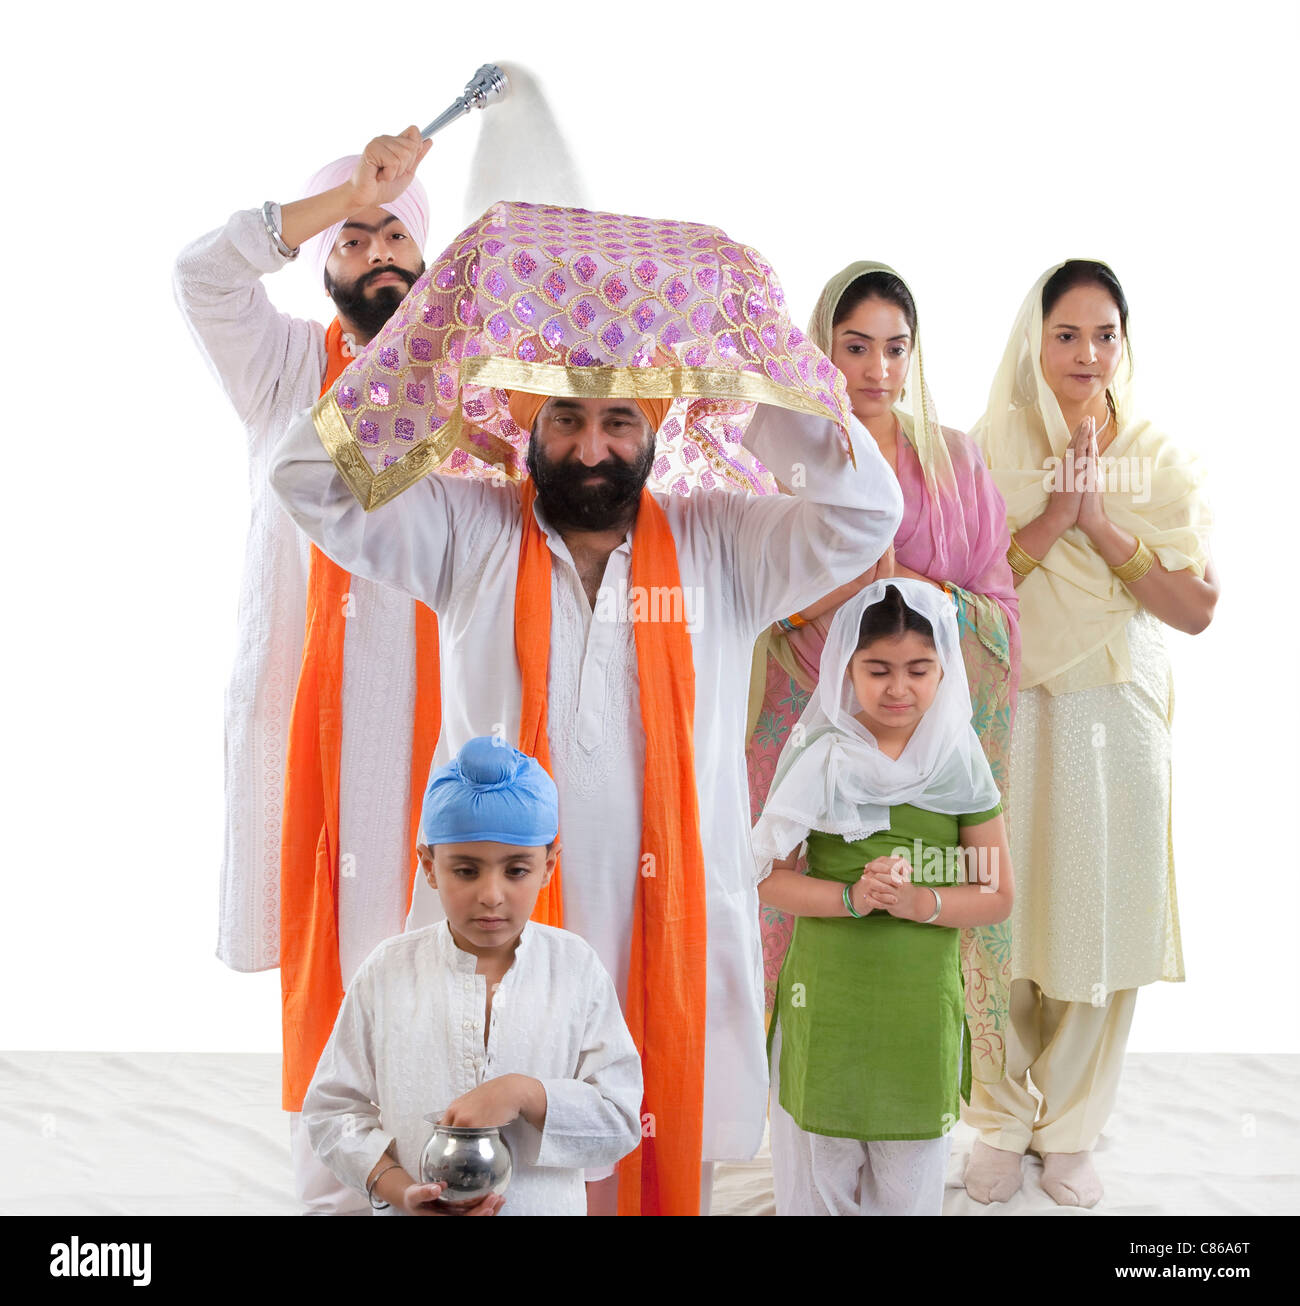 Sikh family performing a ritual ceremony Stock Photo